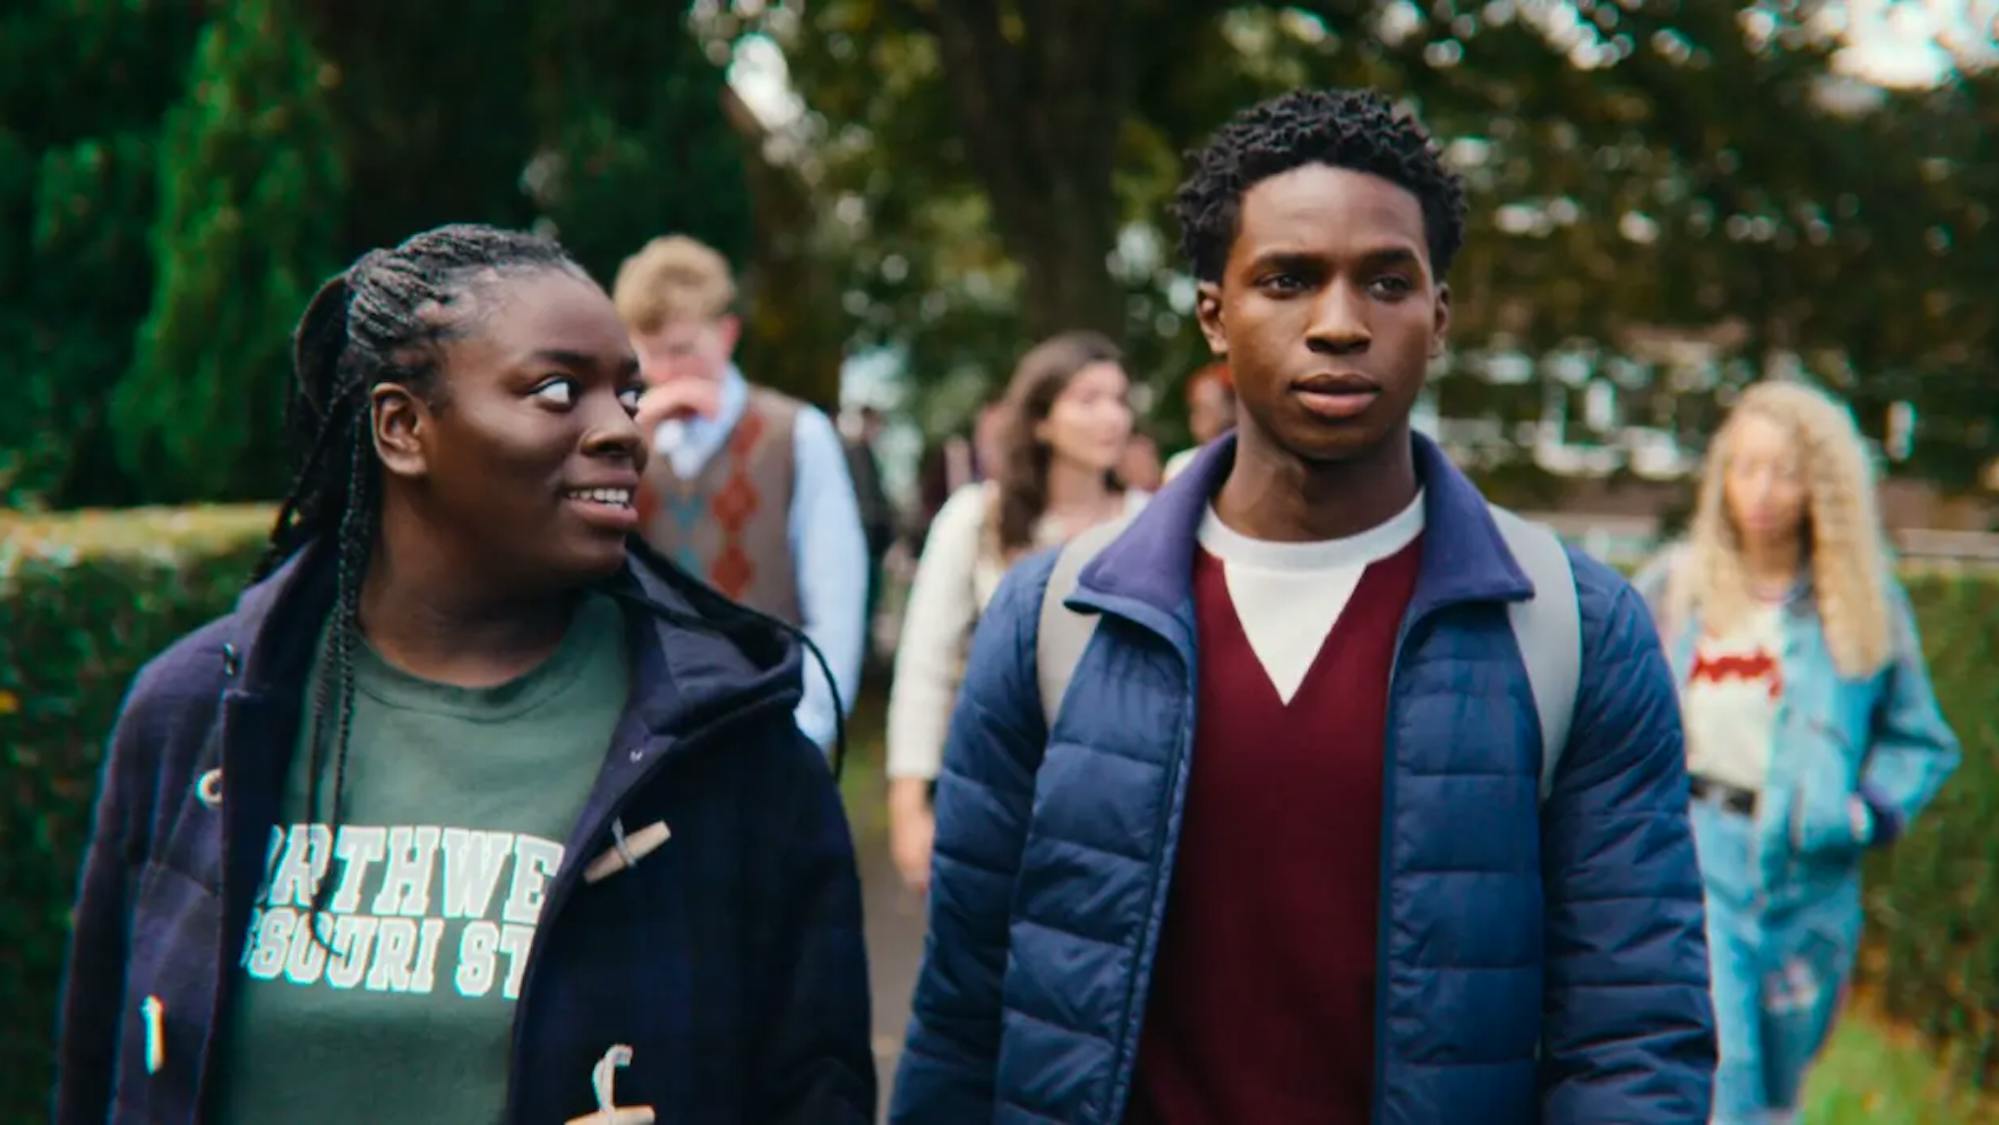 Viv Odesanya (Chinenye Edeuzu) and Jackson Marchetti (Kedar Williams-Stirling) walk together along a hedged path. She wears a green t-shirt and he wears a red sweater. They both wear navy jackets. 